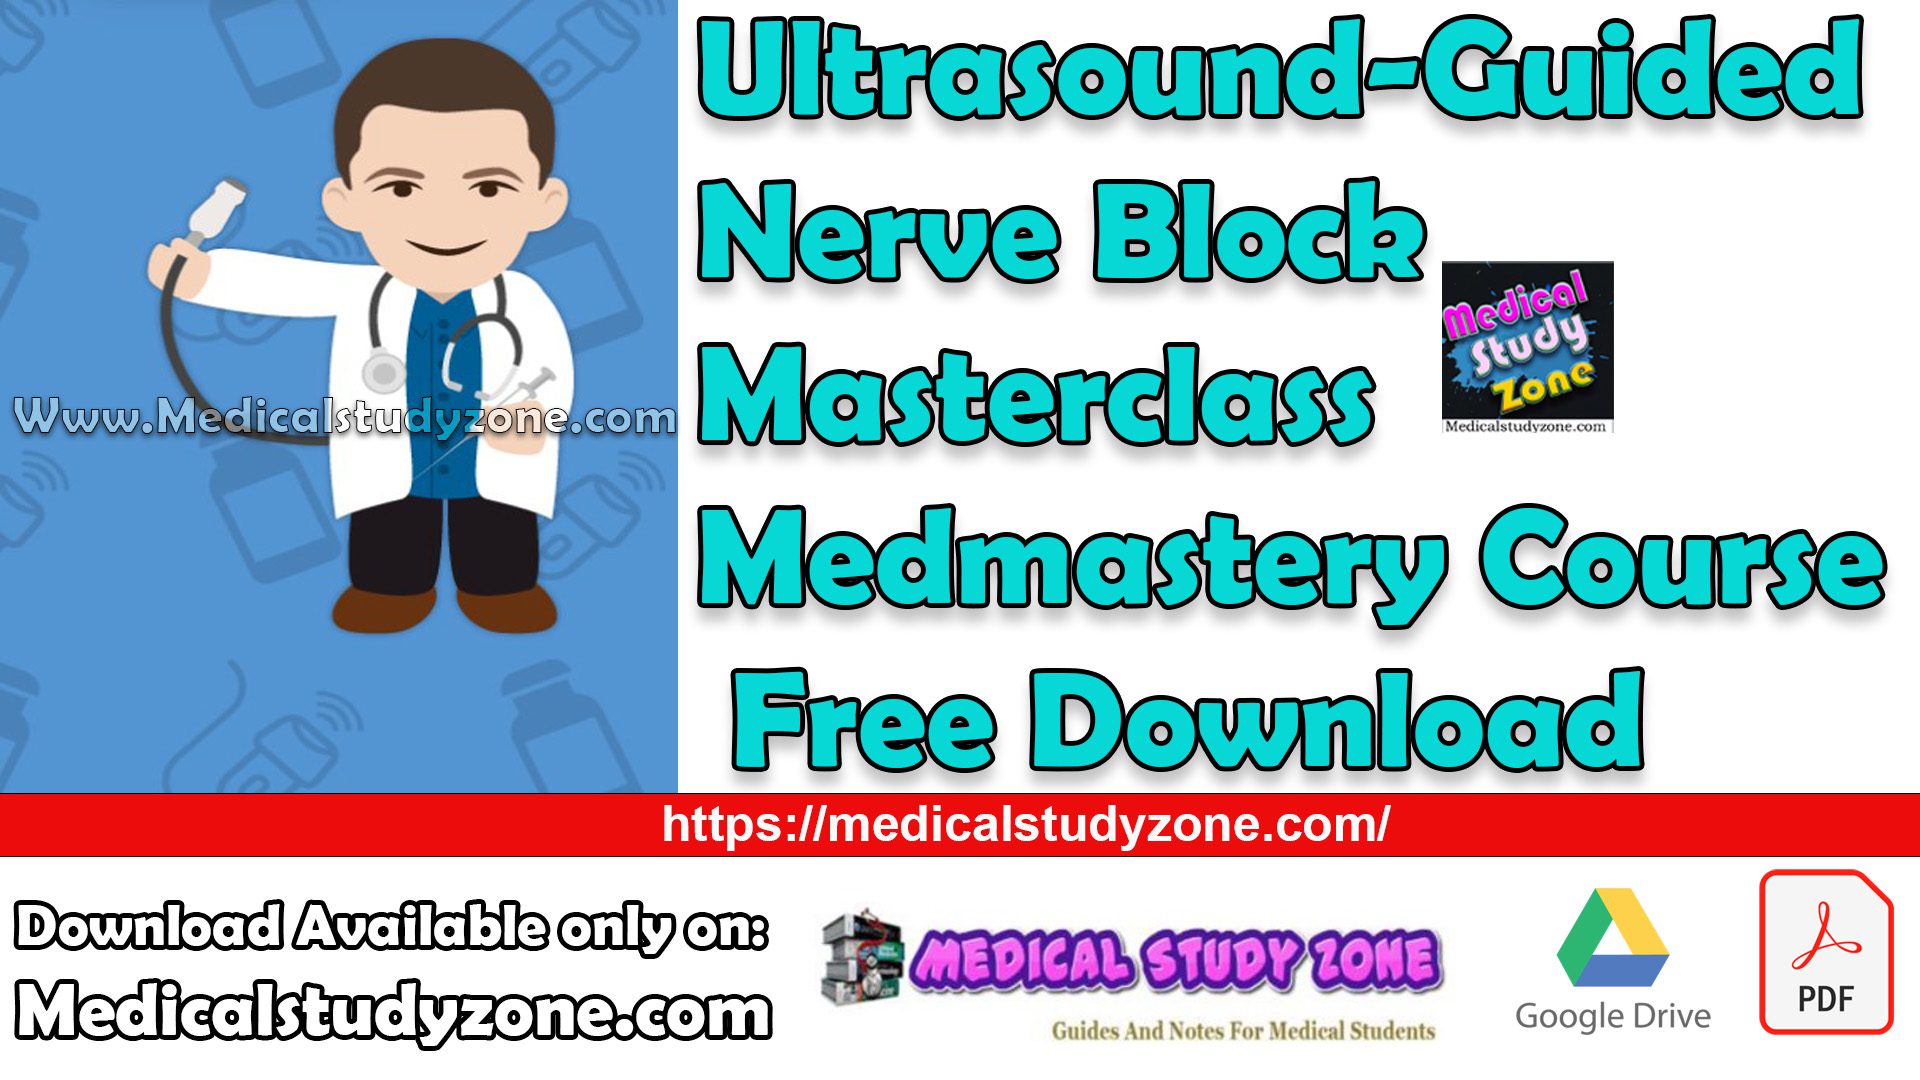 Ultrasound-Guided Nerve Block Masterclass Medmastery Course Free Download